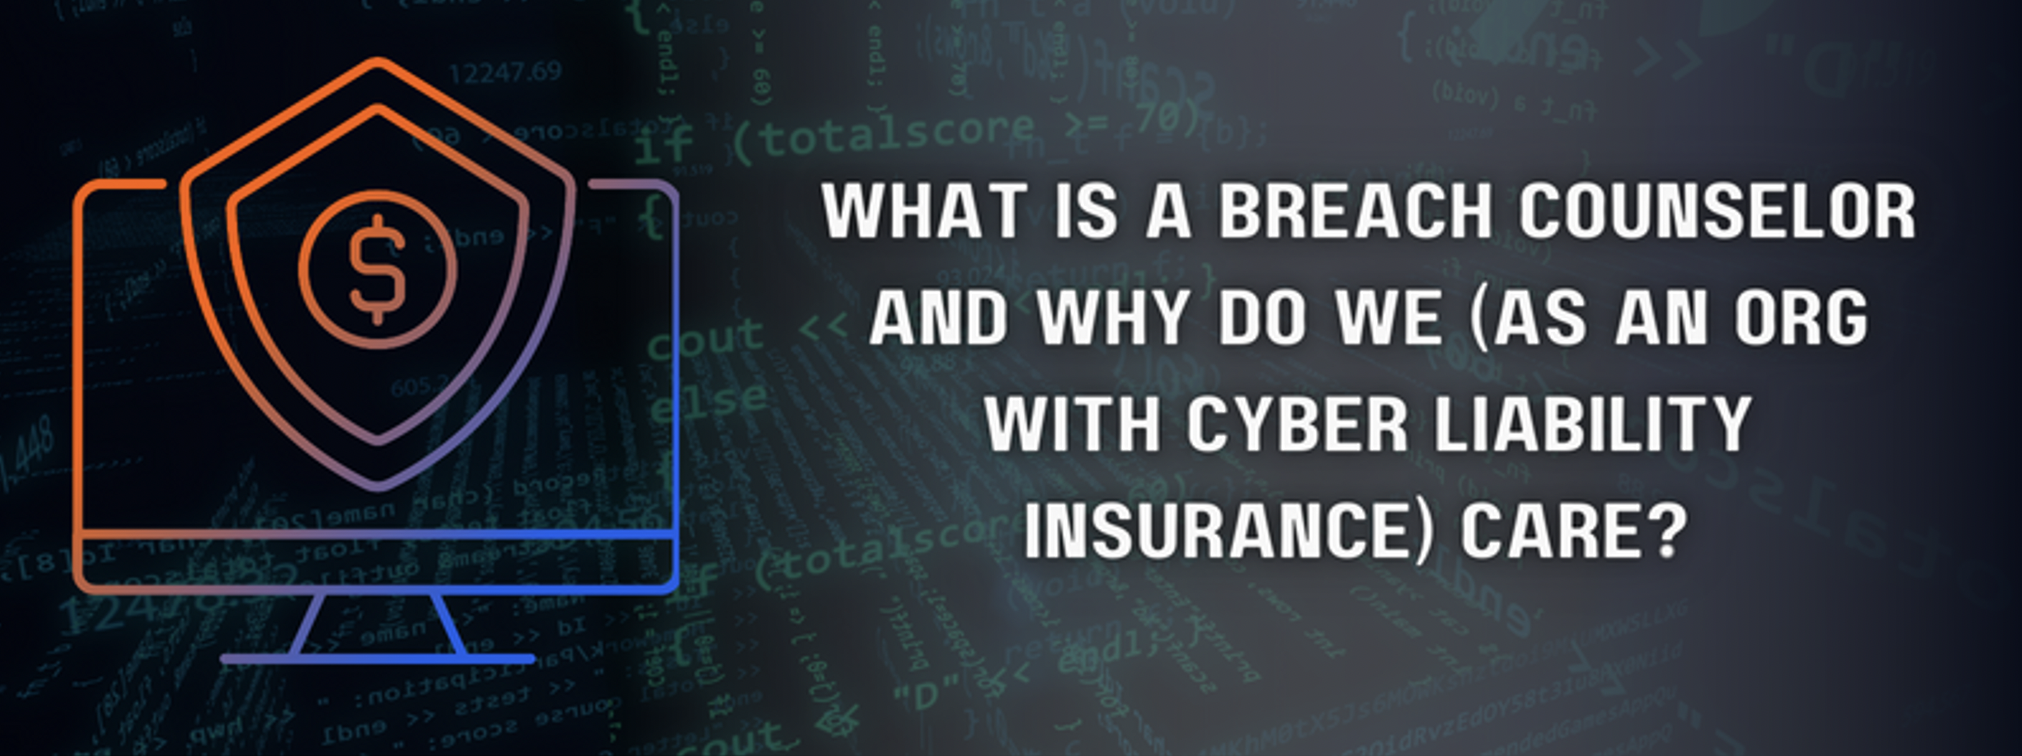 What is a Breach Counselor and Why Do We (as an Org with Cyber Liability Insurance) Care?